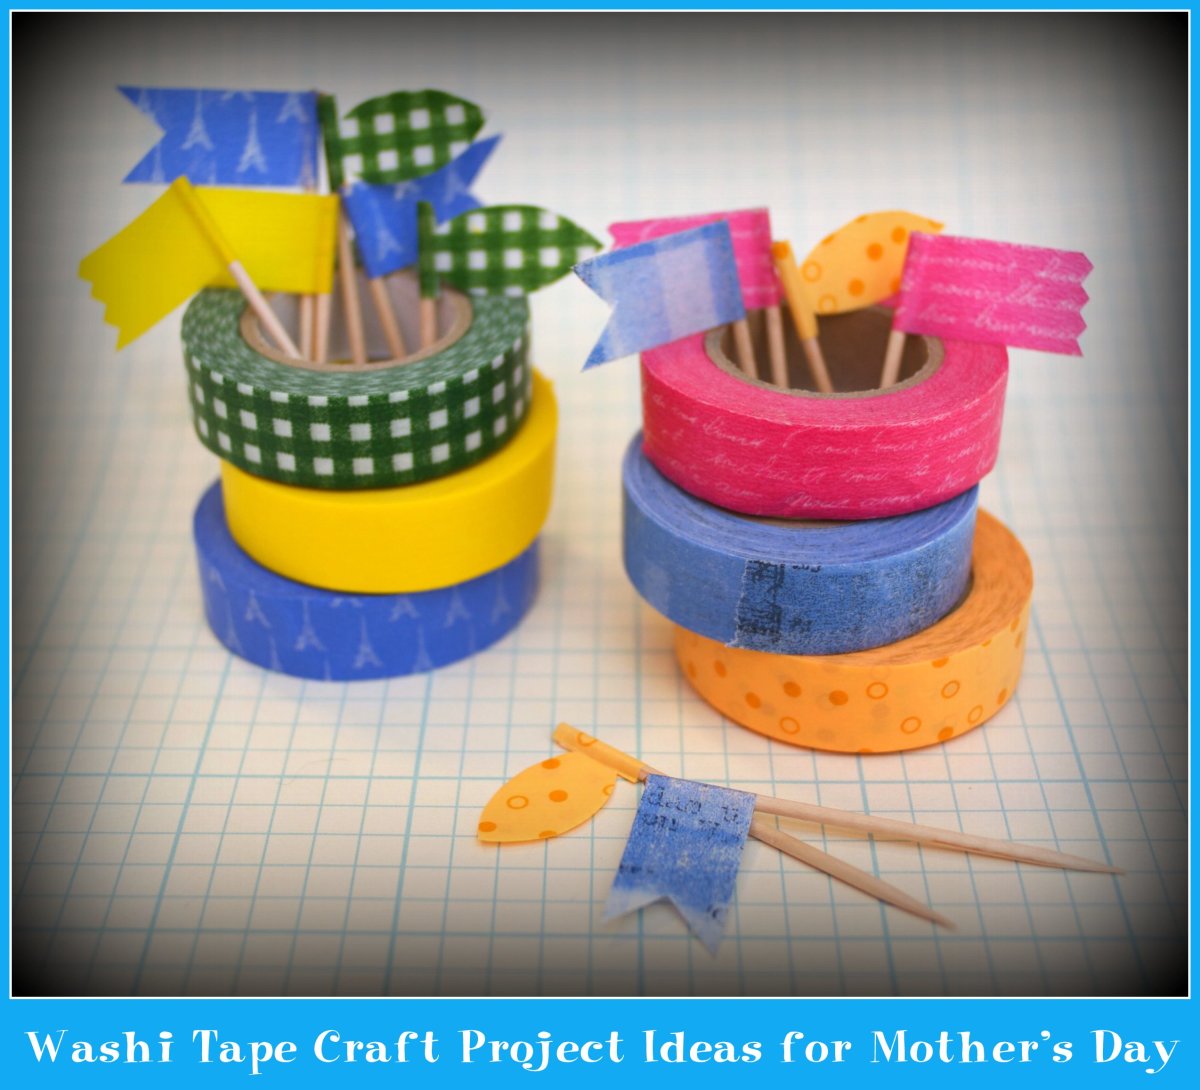 washi-tape-craft-project-ideas-for-mothers-day